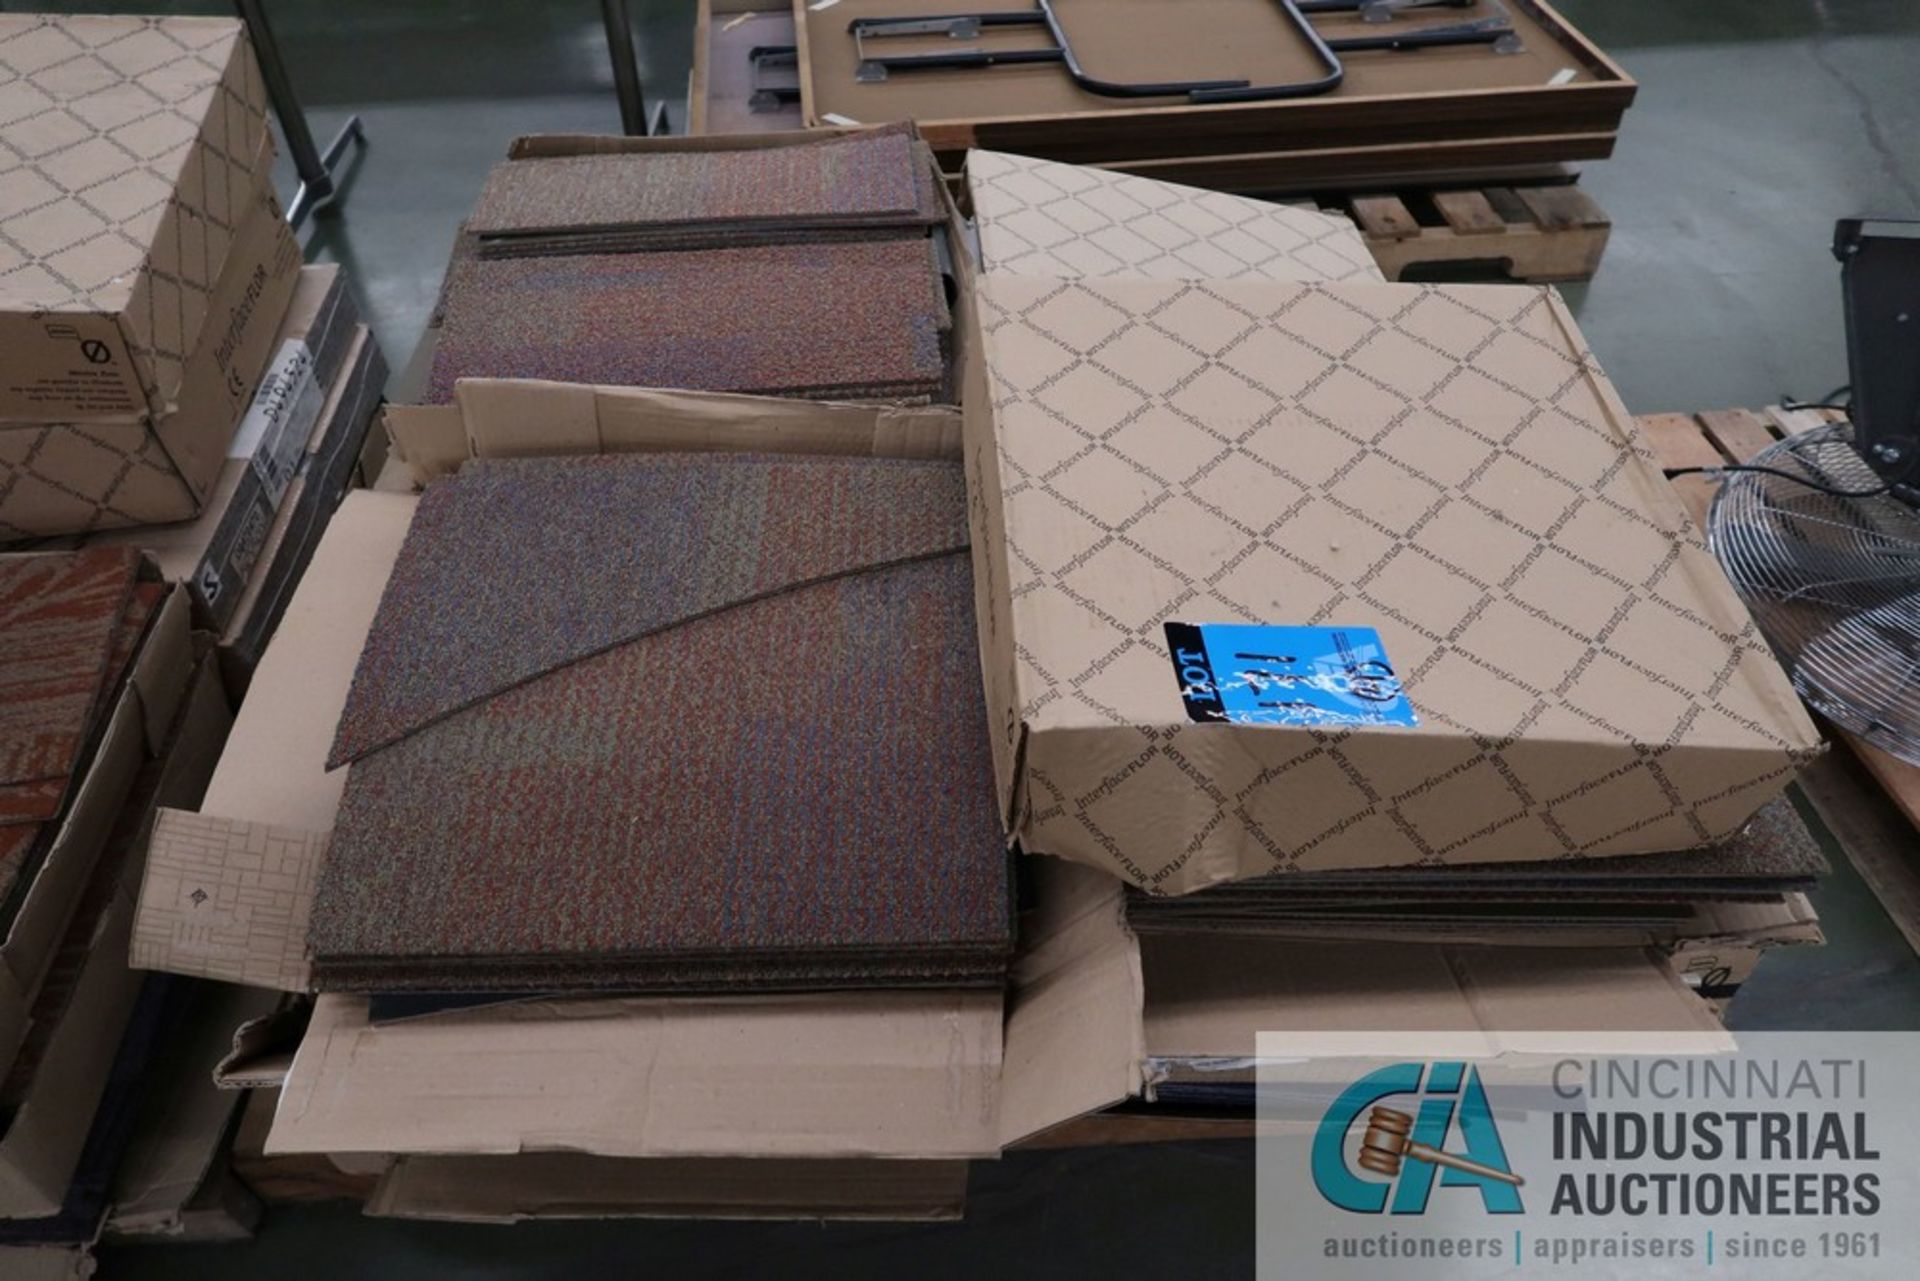 (LOT) (7) SKIDS MISCELLANEOUS CARPET, TILE, AND CEILING TILE - Image 2 of 7